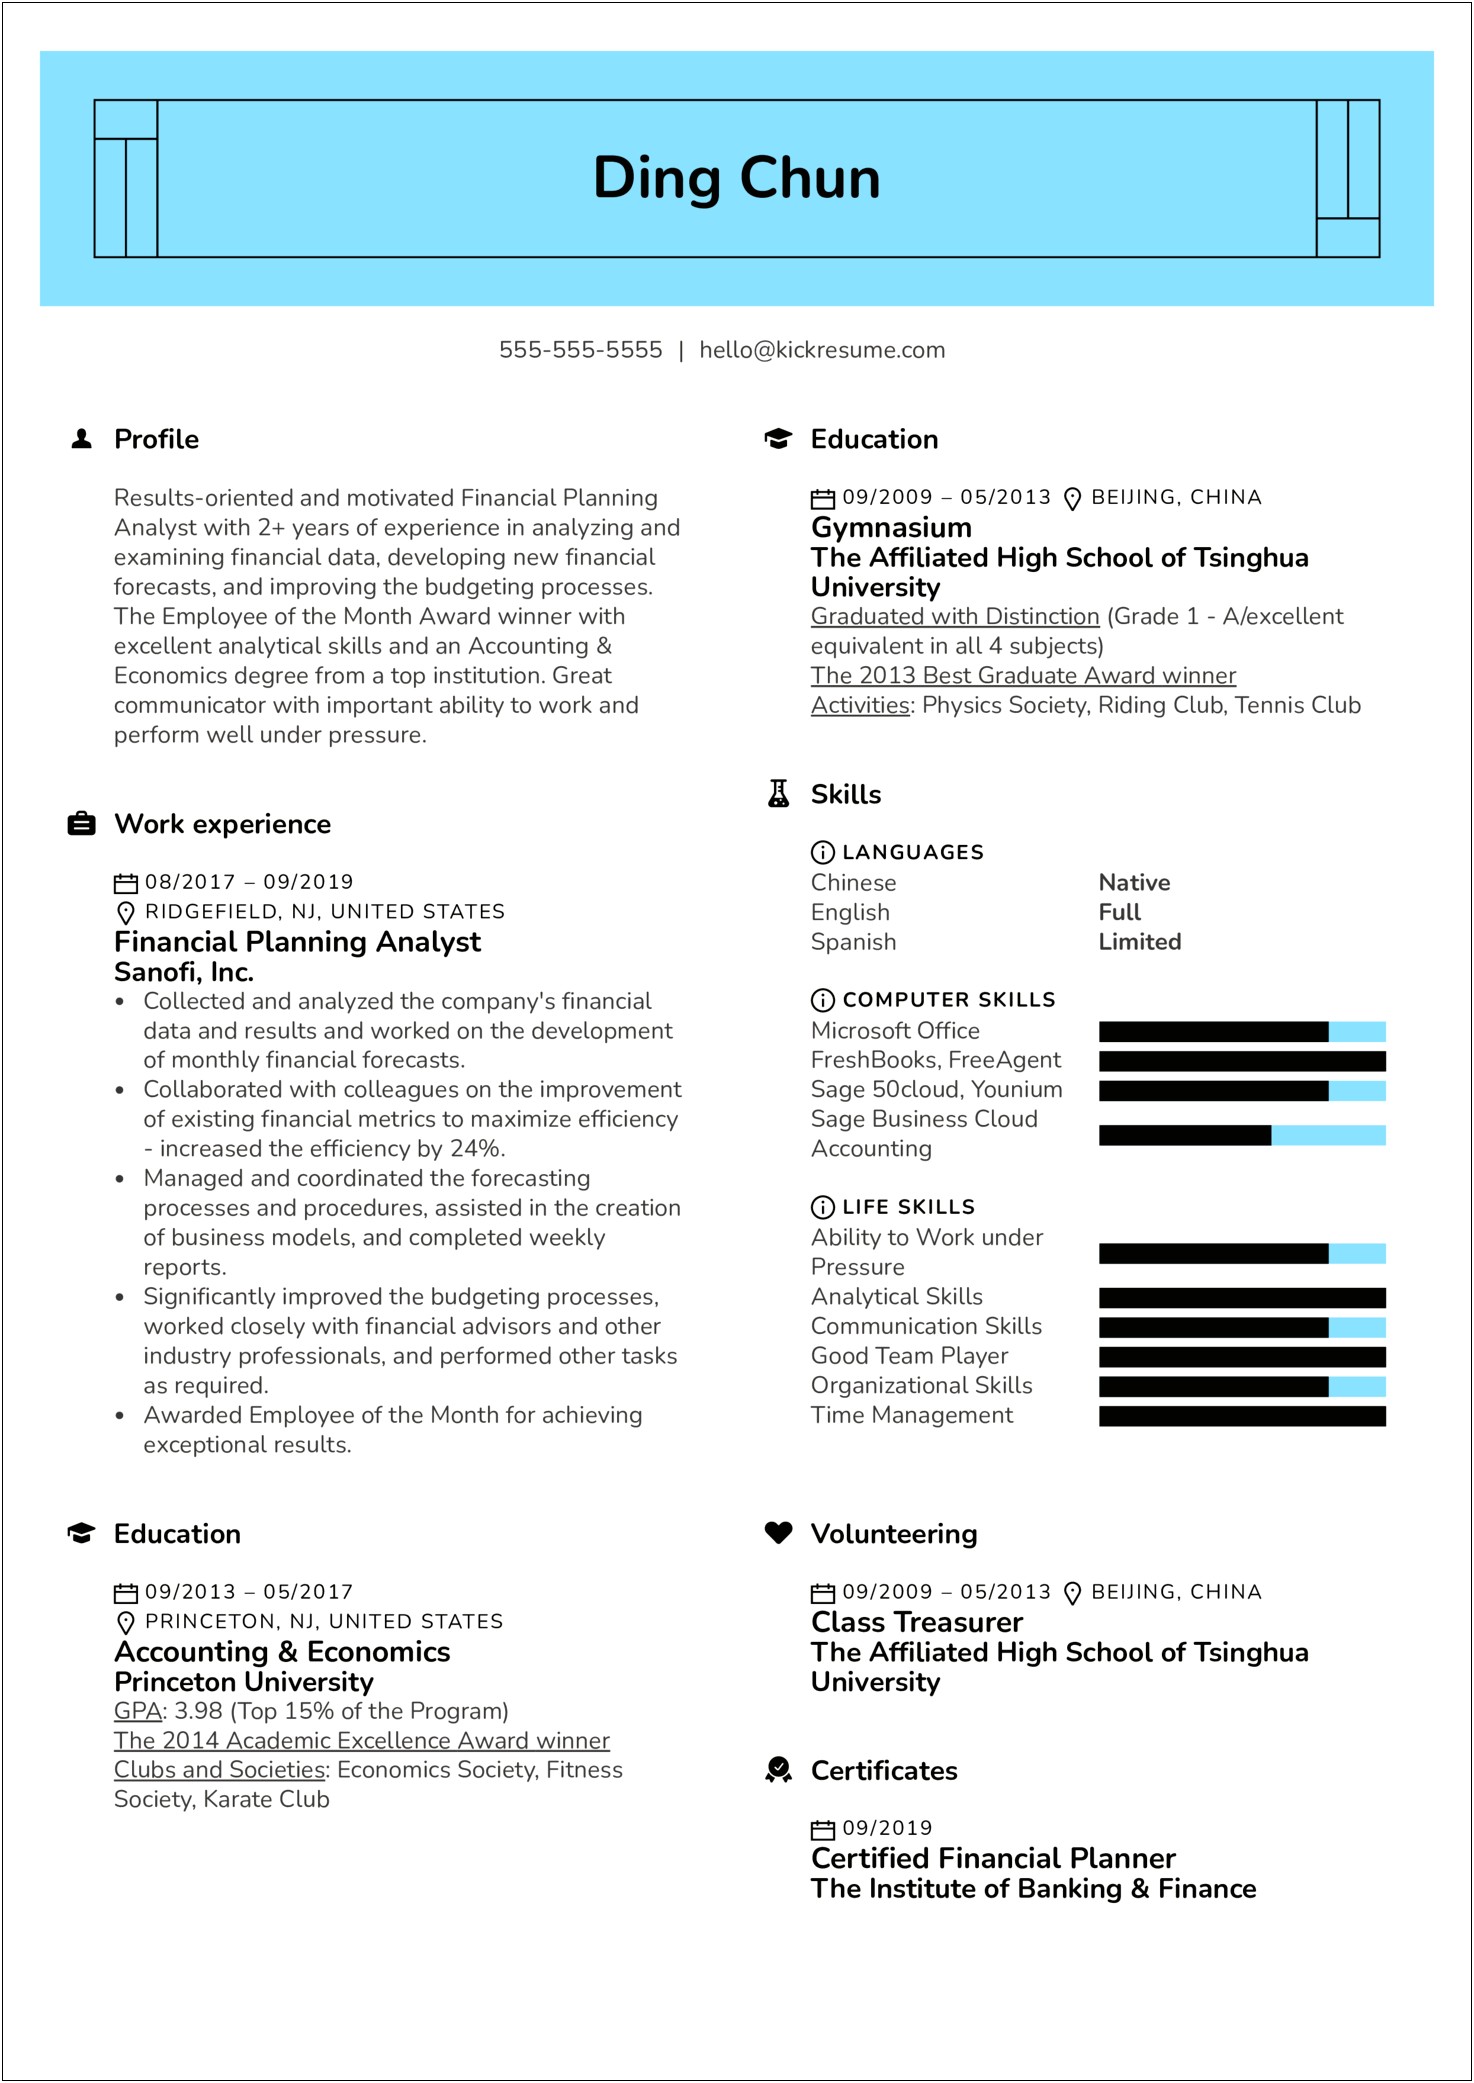 Sample Resume For Financial Planning And Analysis